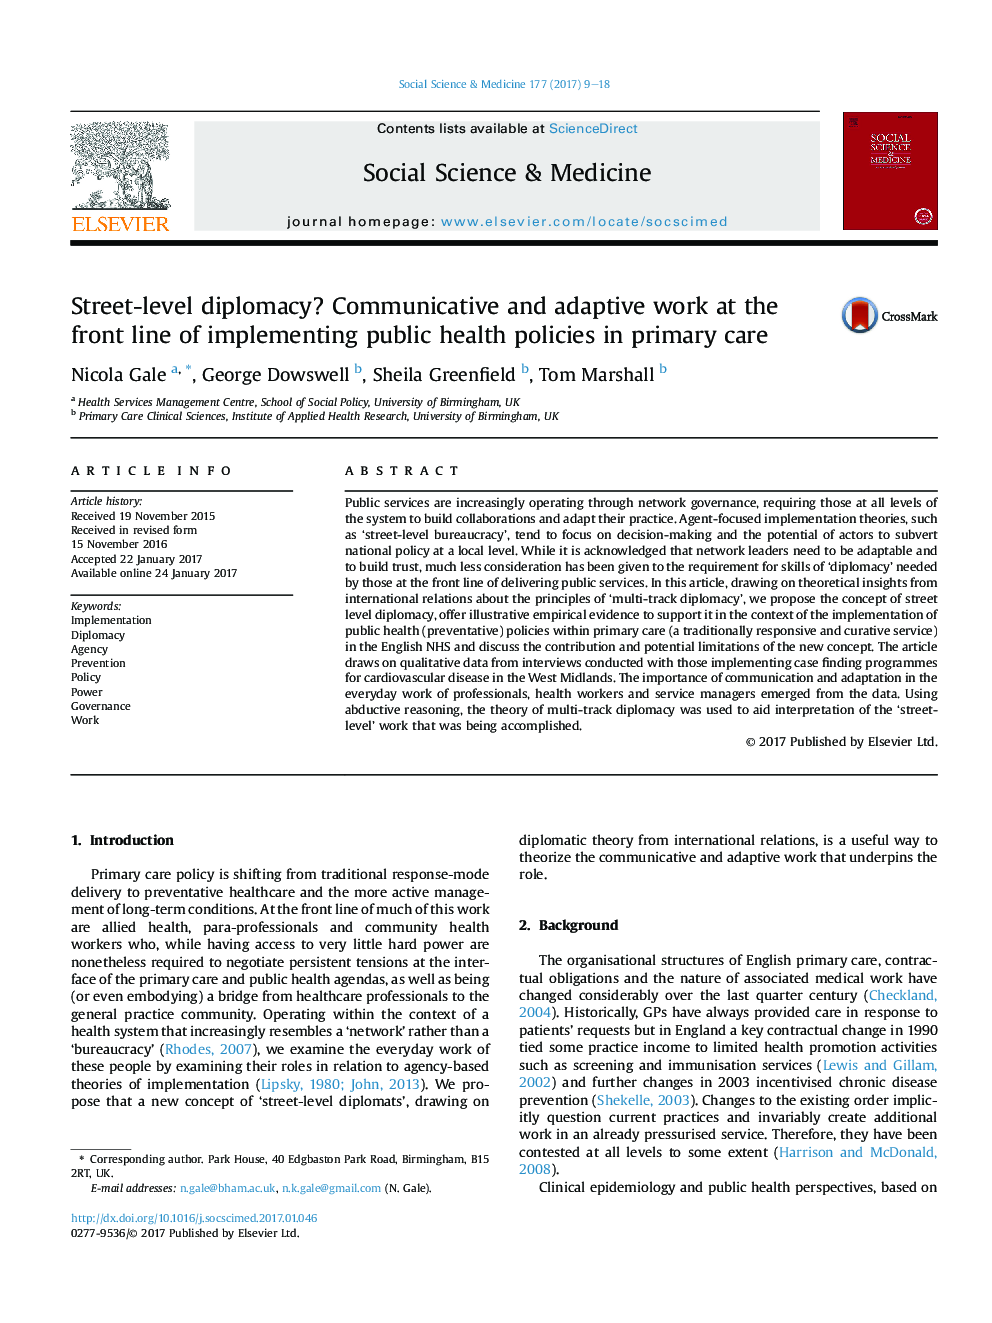 Street-level diplomacy? Communicative and adaptive work at the front line of implementing public health policies in primary care